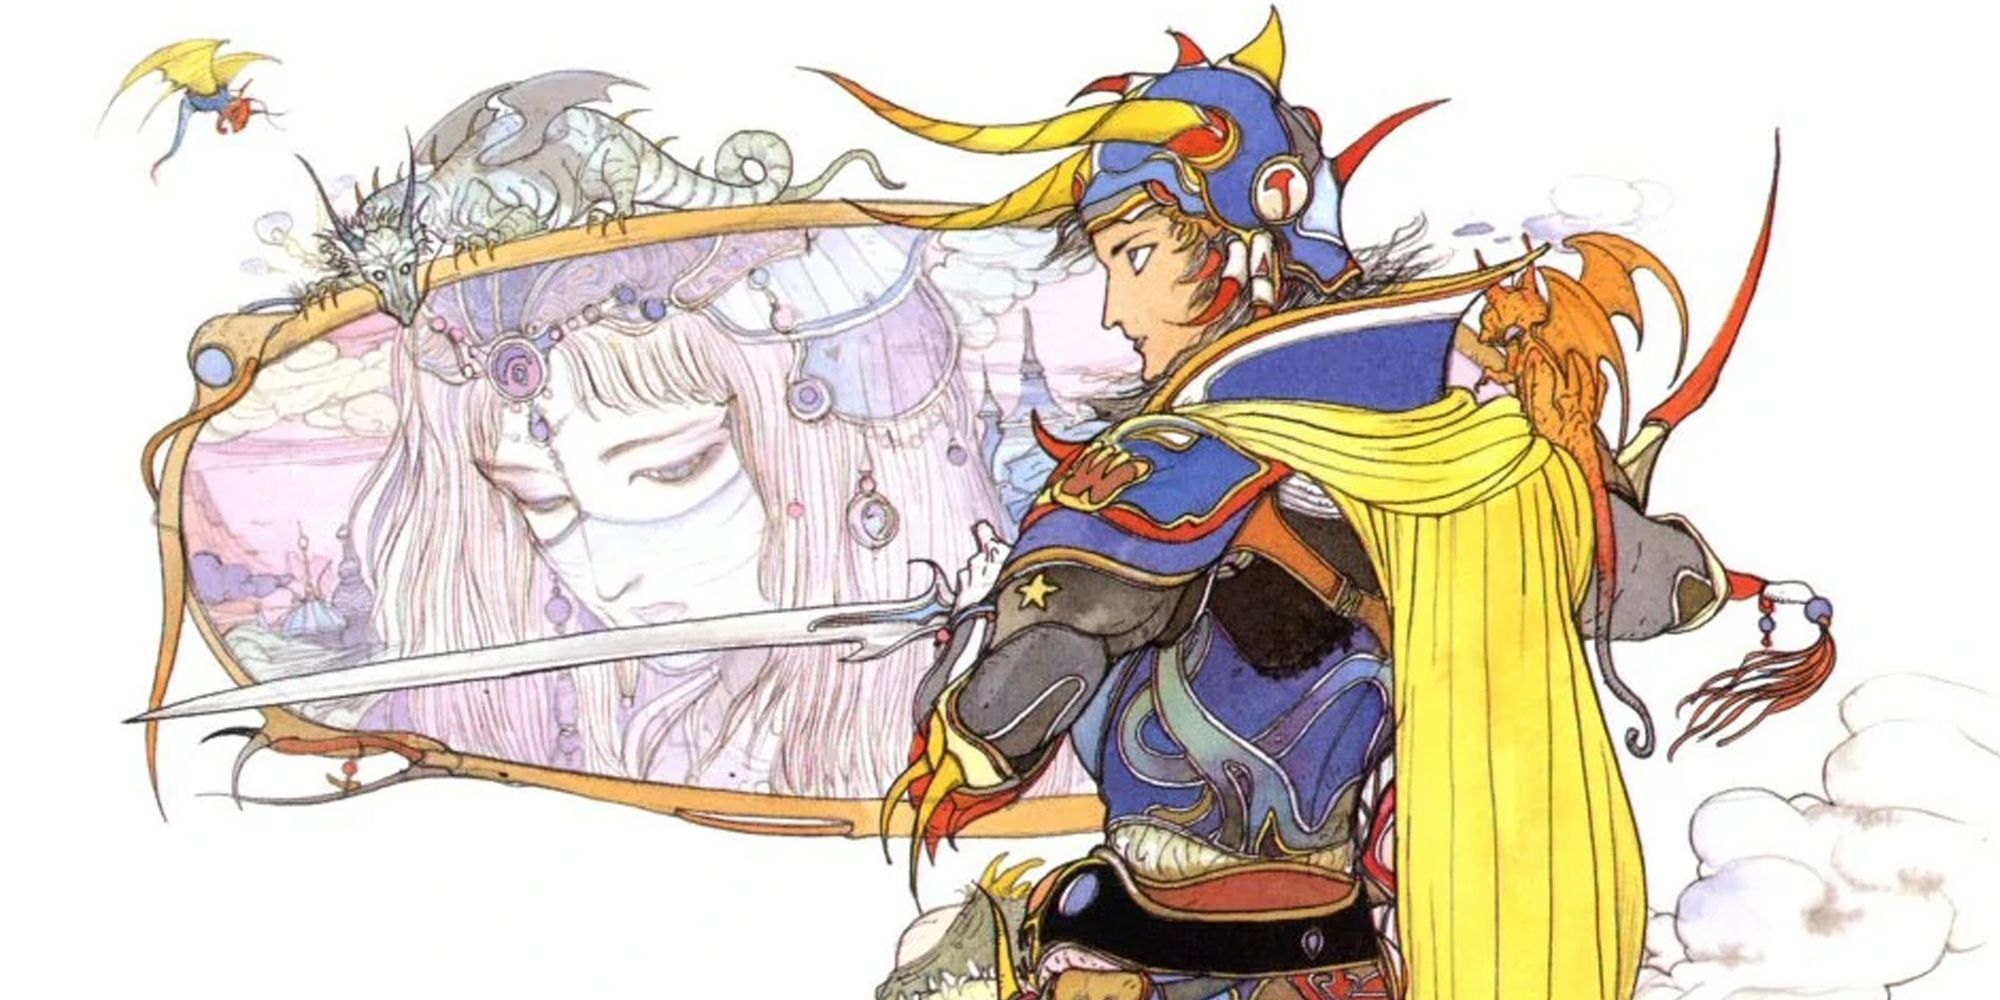 An official artwork of Final Fantasy 1 by Yoshitaka Amano, featuring the Warrior of Light in full-clad, blue armor with yellow and orange hues, holding a sword. Their helmet has yellow horns and their shapes resemble those of Behemoths. In the background is a woman with pink hair and a sad demeanor. Lying on top of the portrait of the woman is a white dragon, while a blue, yellow, and red one, which is smaller, flies above the white dragon.